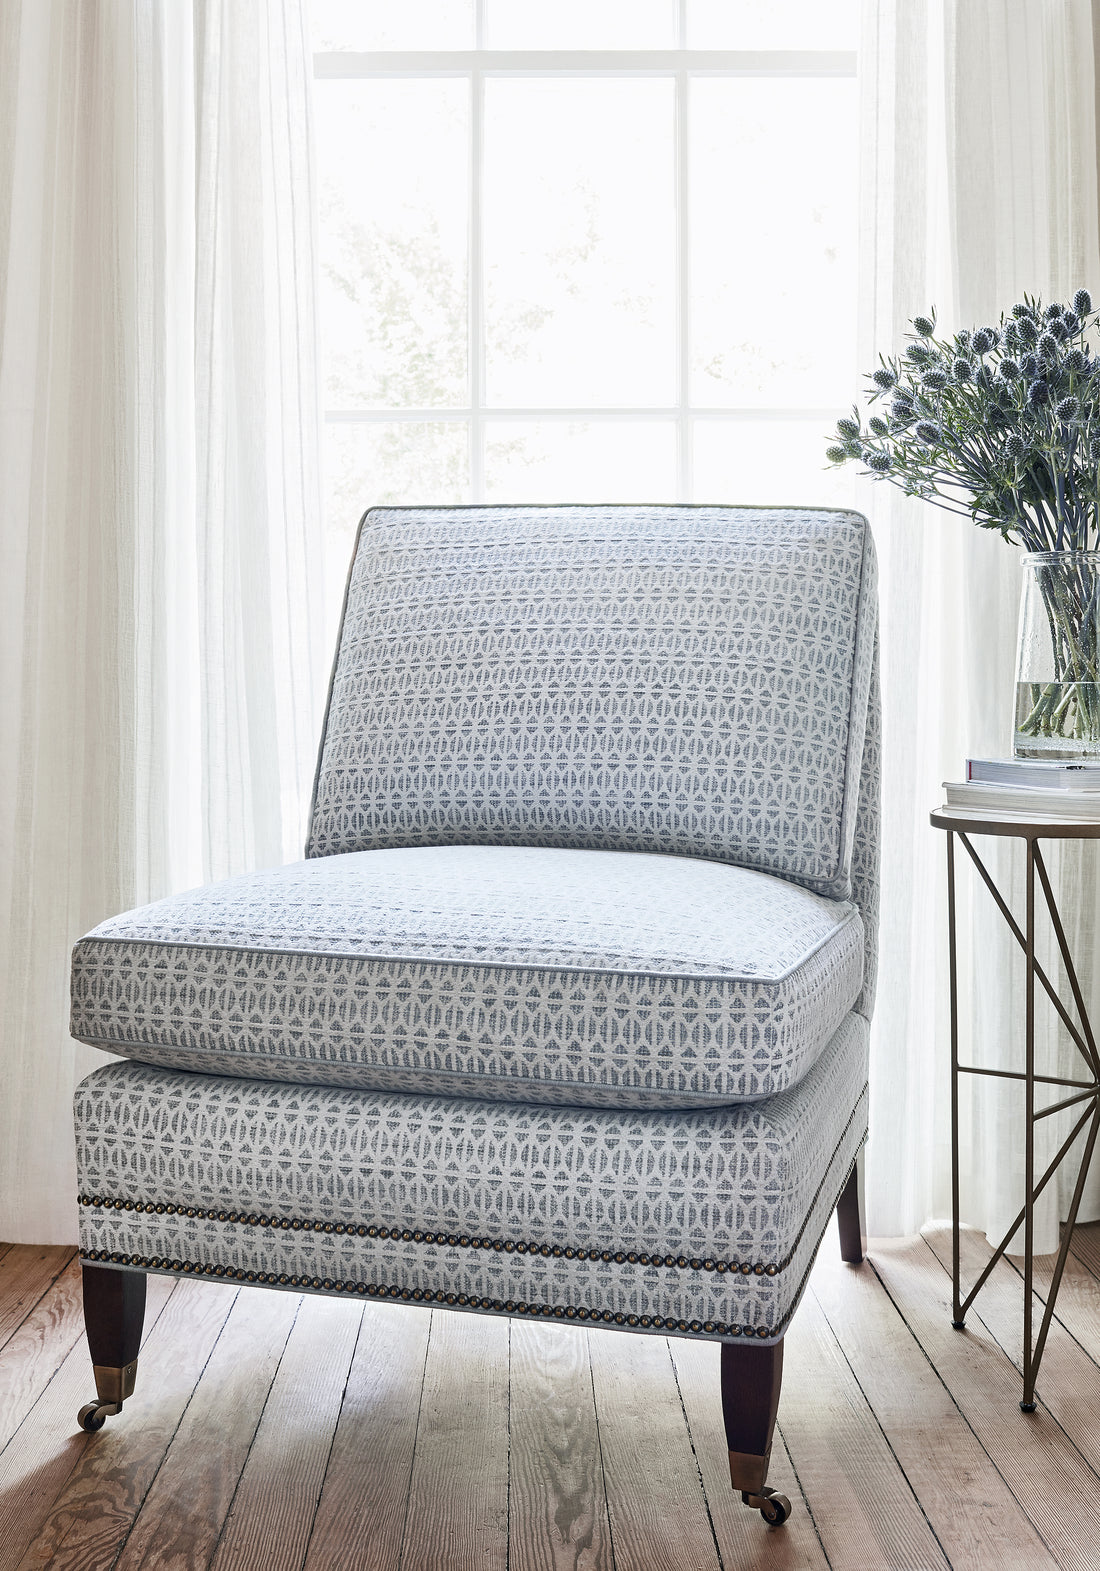 Mayfair Chair in Quinlan woven fabric in slate color - pattern number W789103 - by Thibaut in the Reverie collection